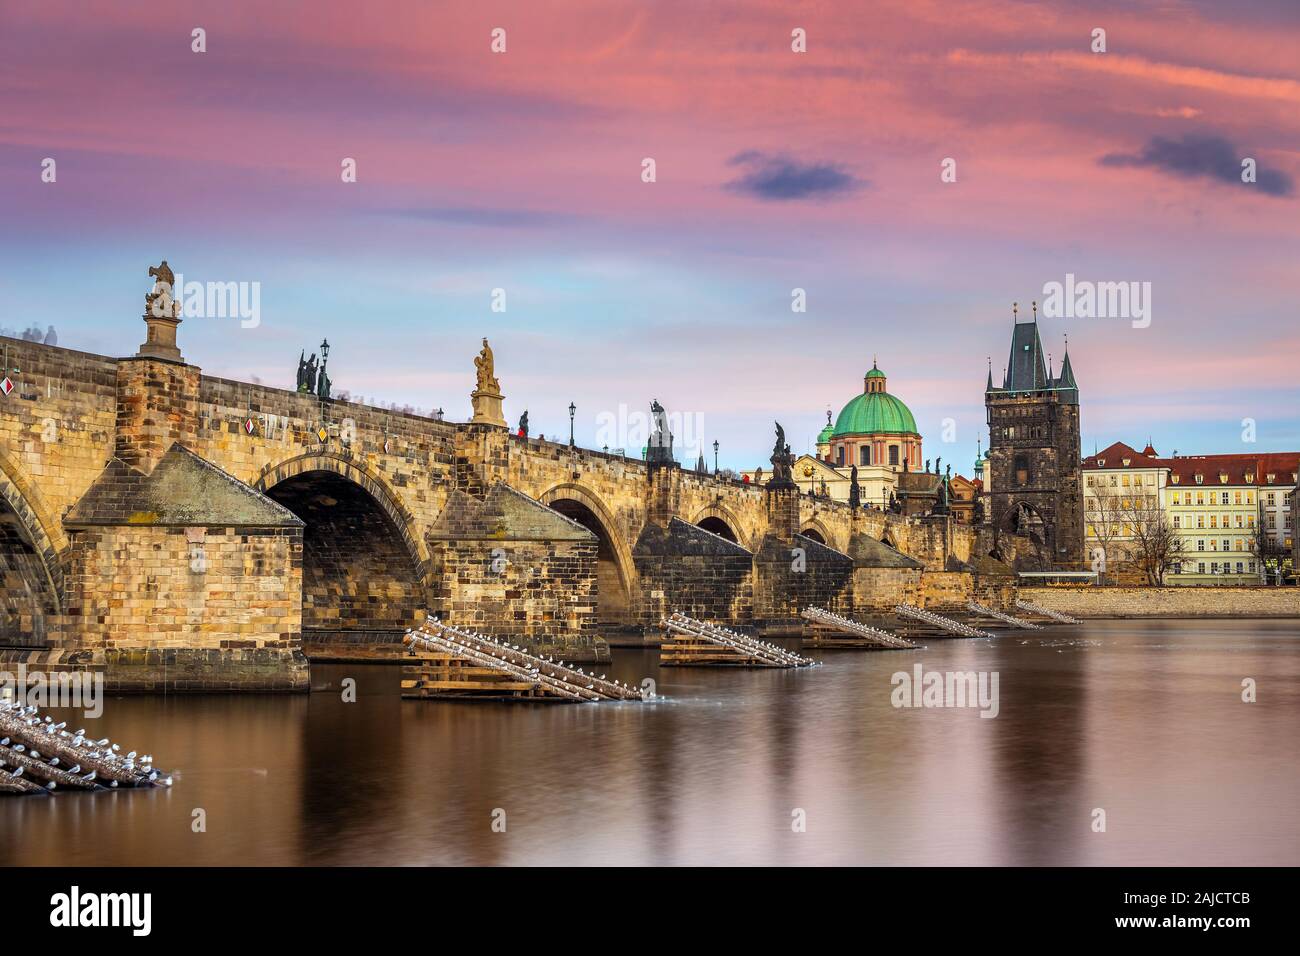 Prague, Czech Republic - The world famous Charles Bridge (Karluv most) with a beautiful purple sky and sunset on a winter afternoon Stock Photo